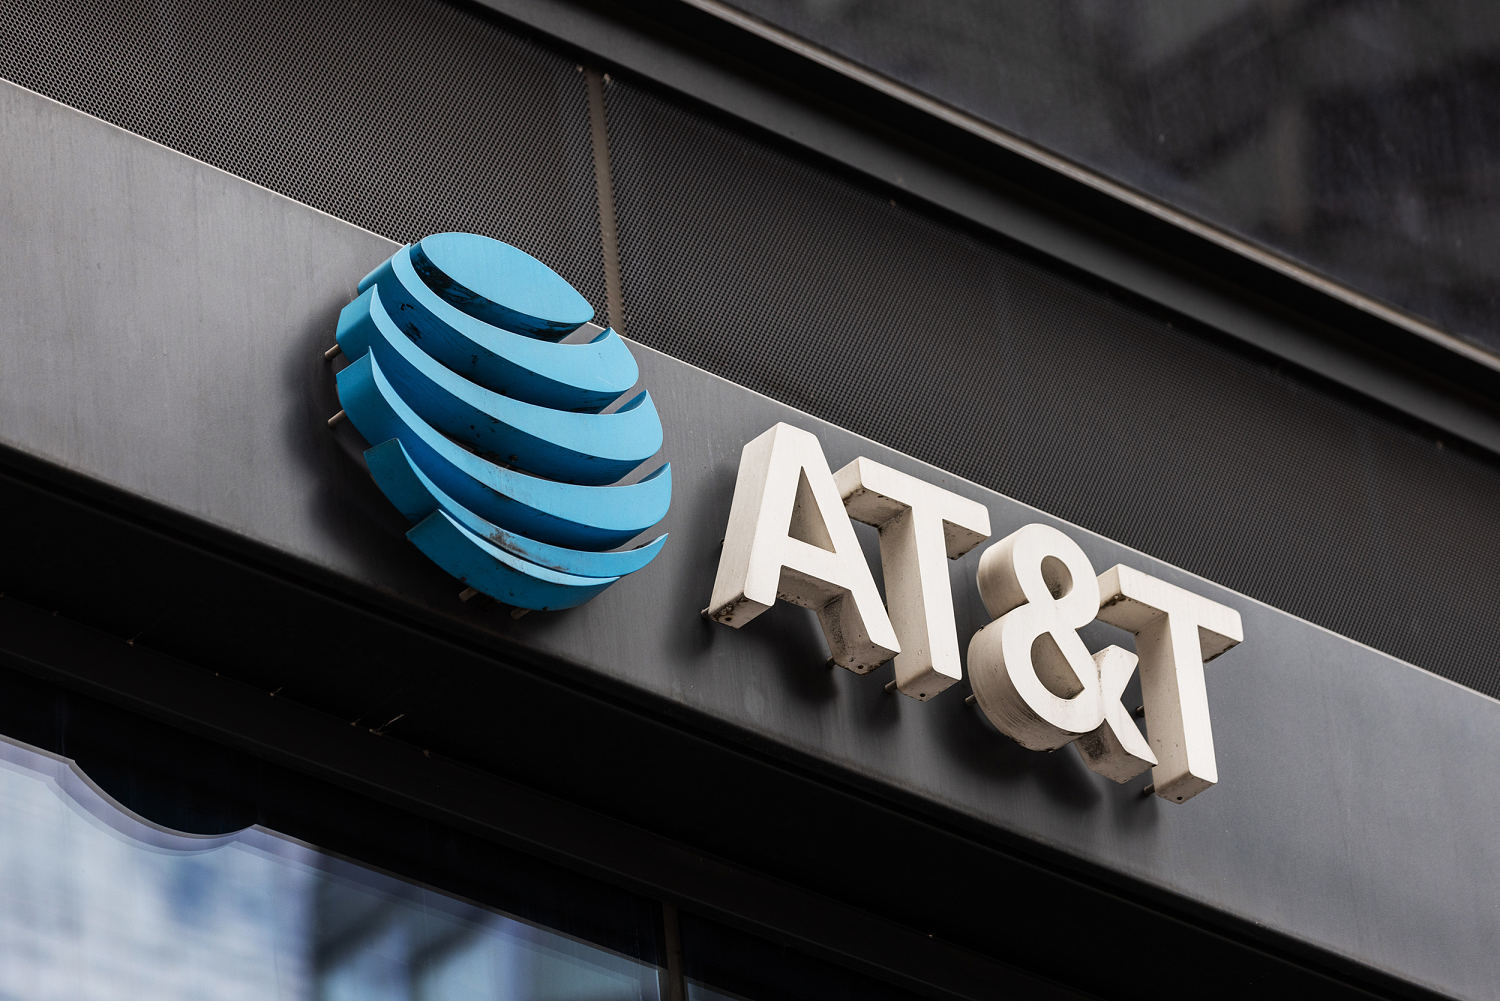 AT&T service restored after customers hit by widespread cellular outages in the U.S.